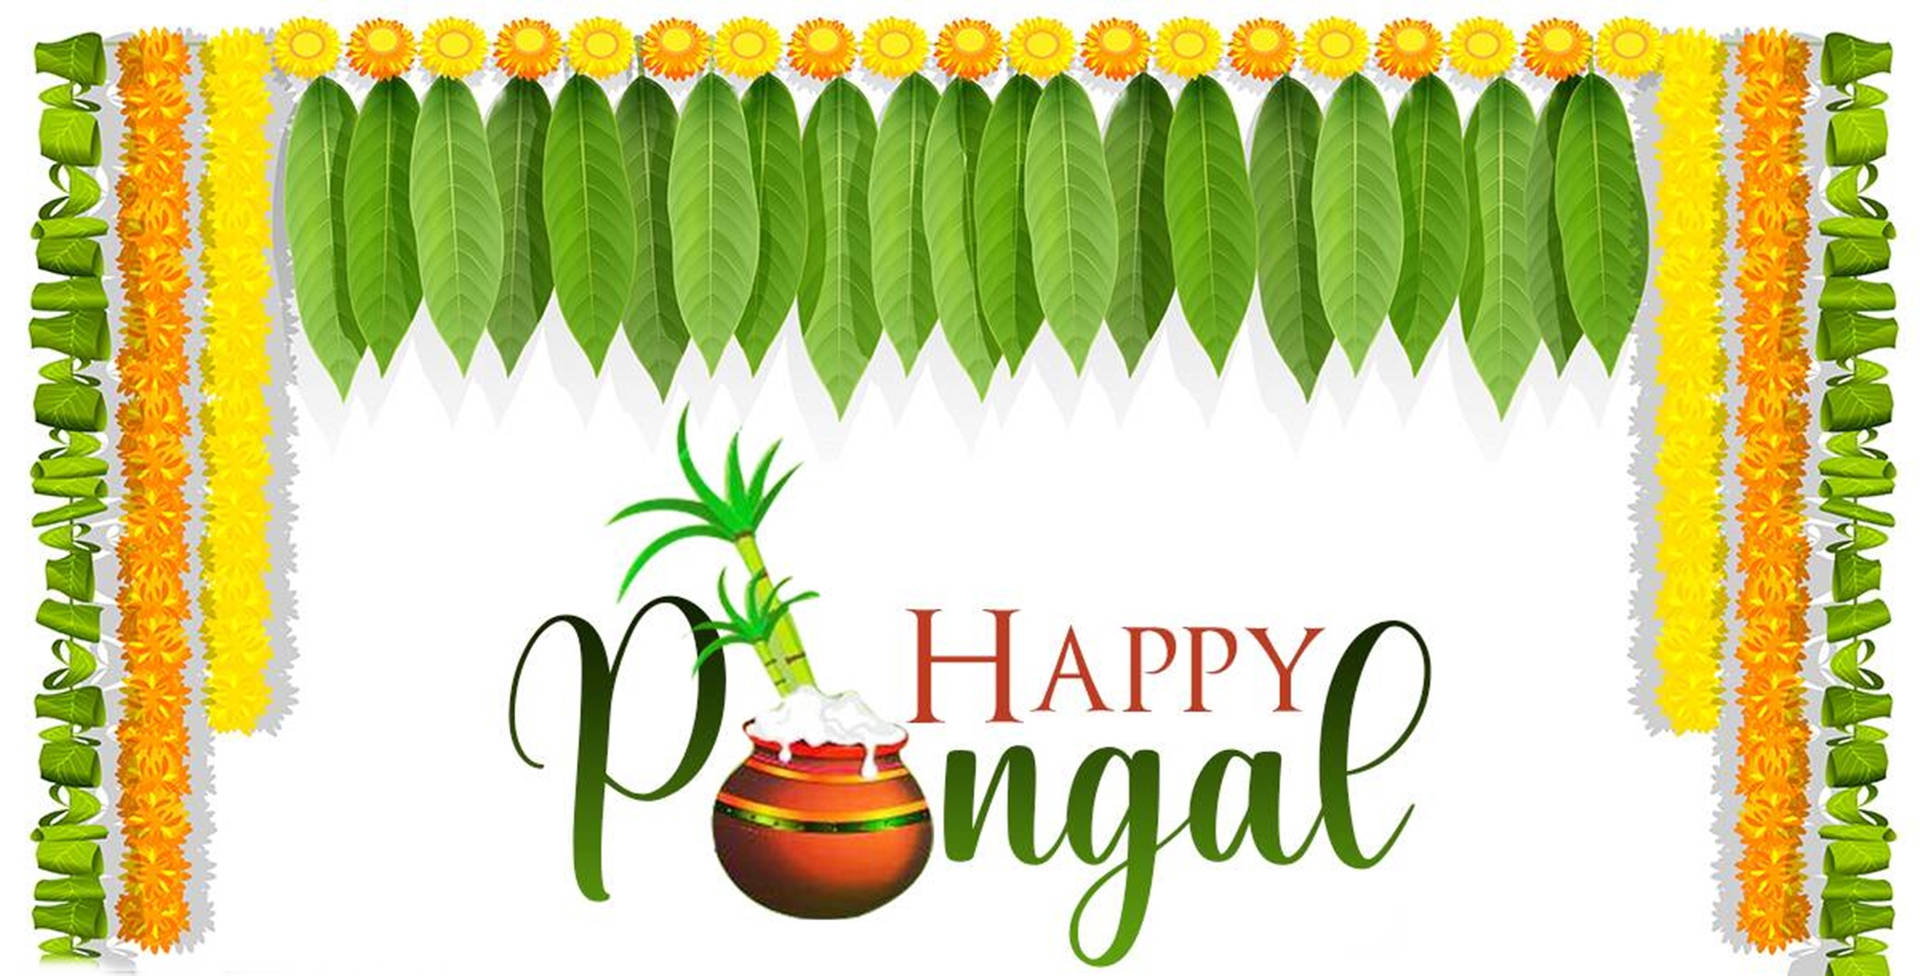 Happy Pongal Palm Leaves